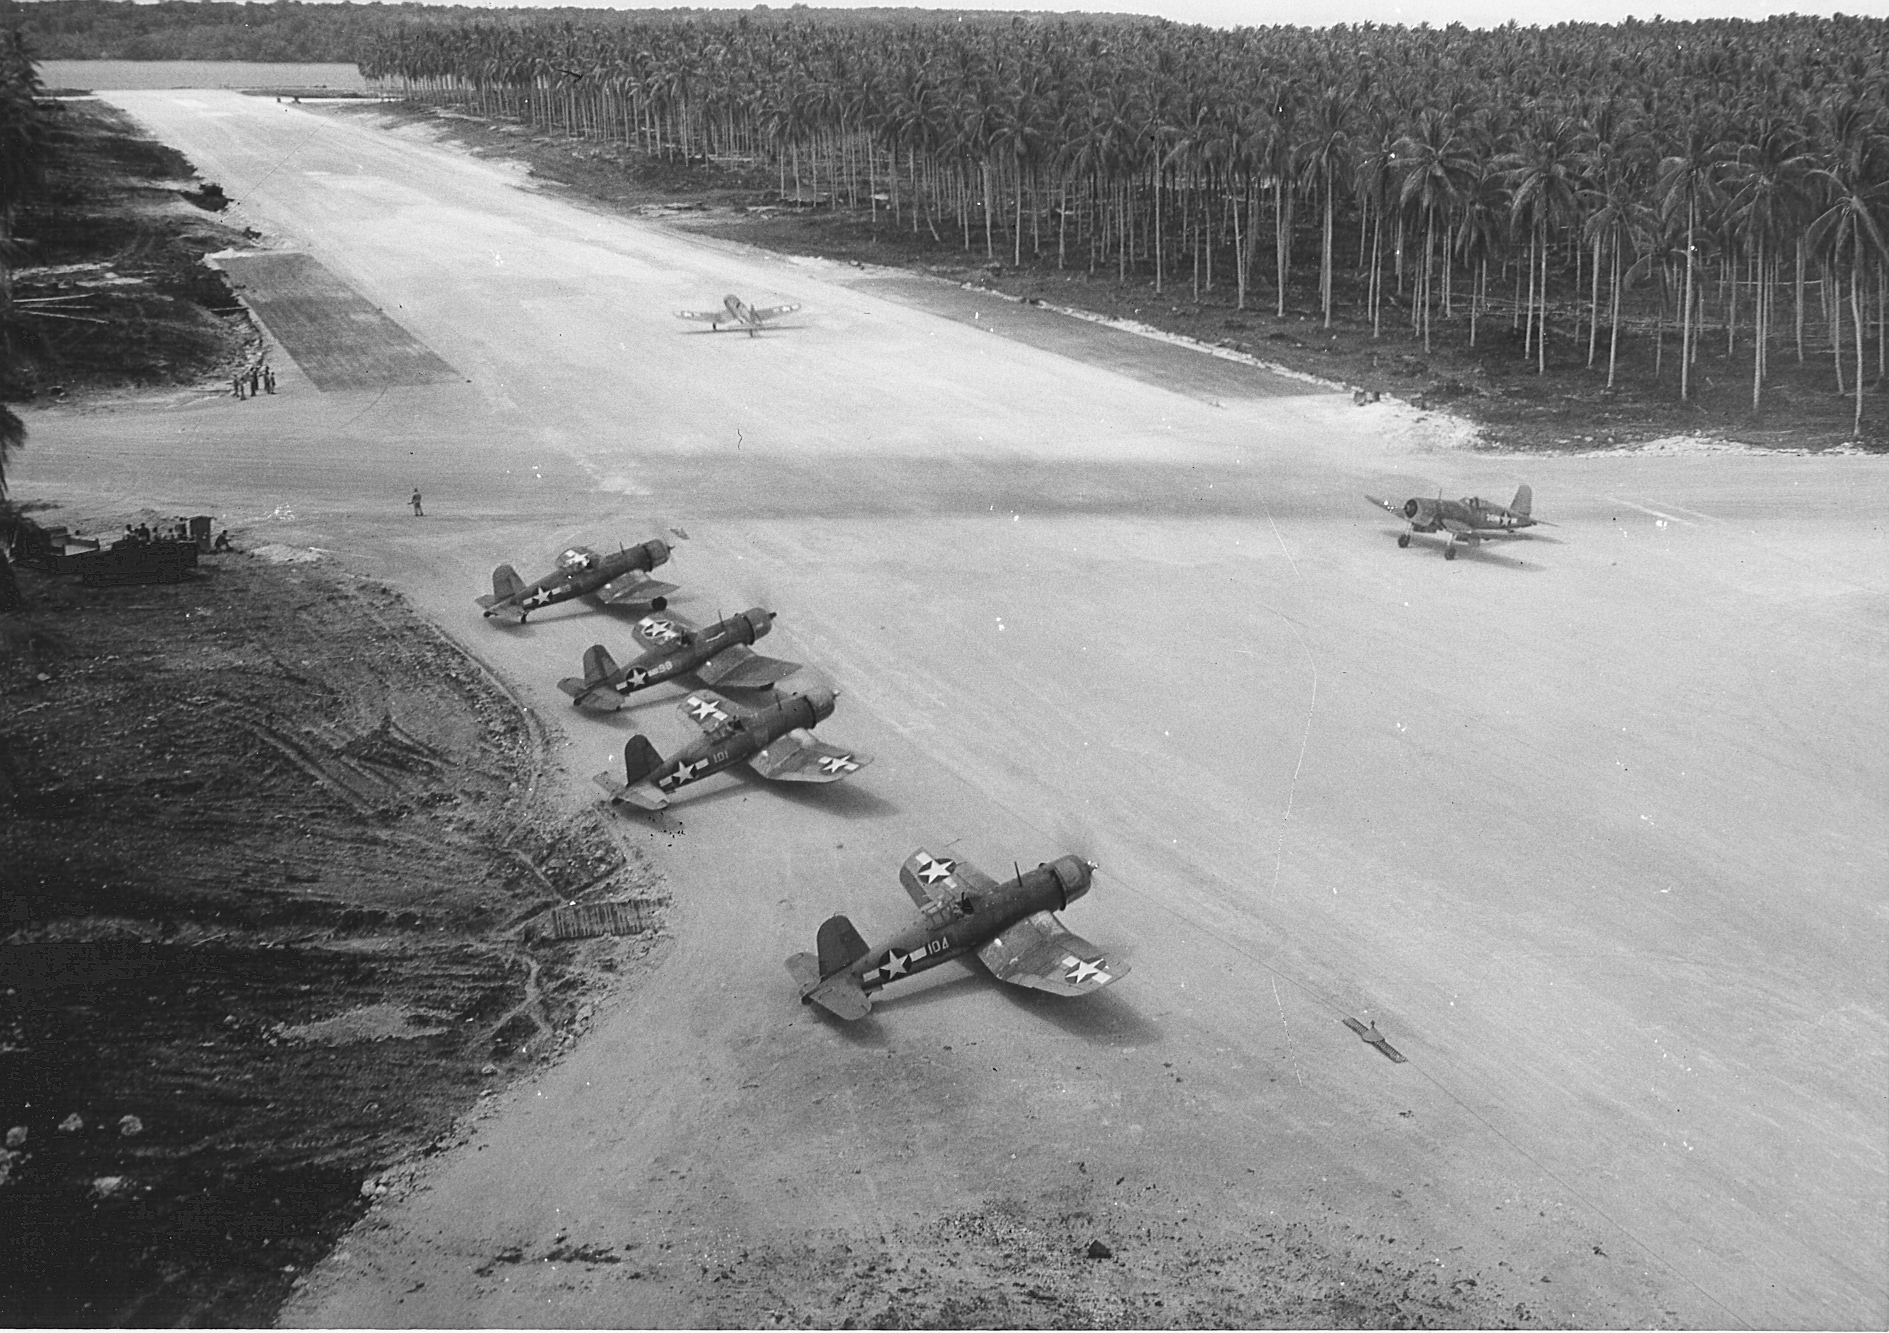 f4u_corsairs_of_vmf-123_on_the_russell_islands_1943.jpg